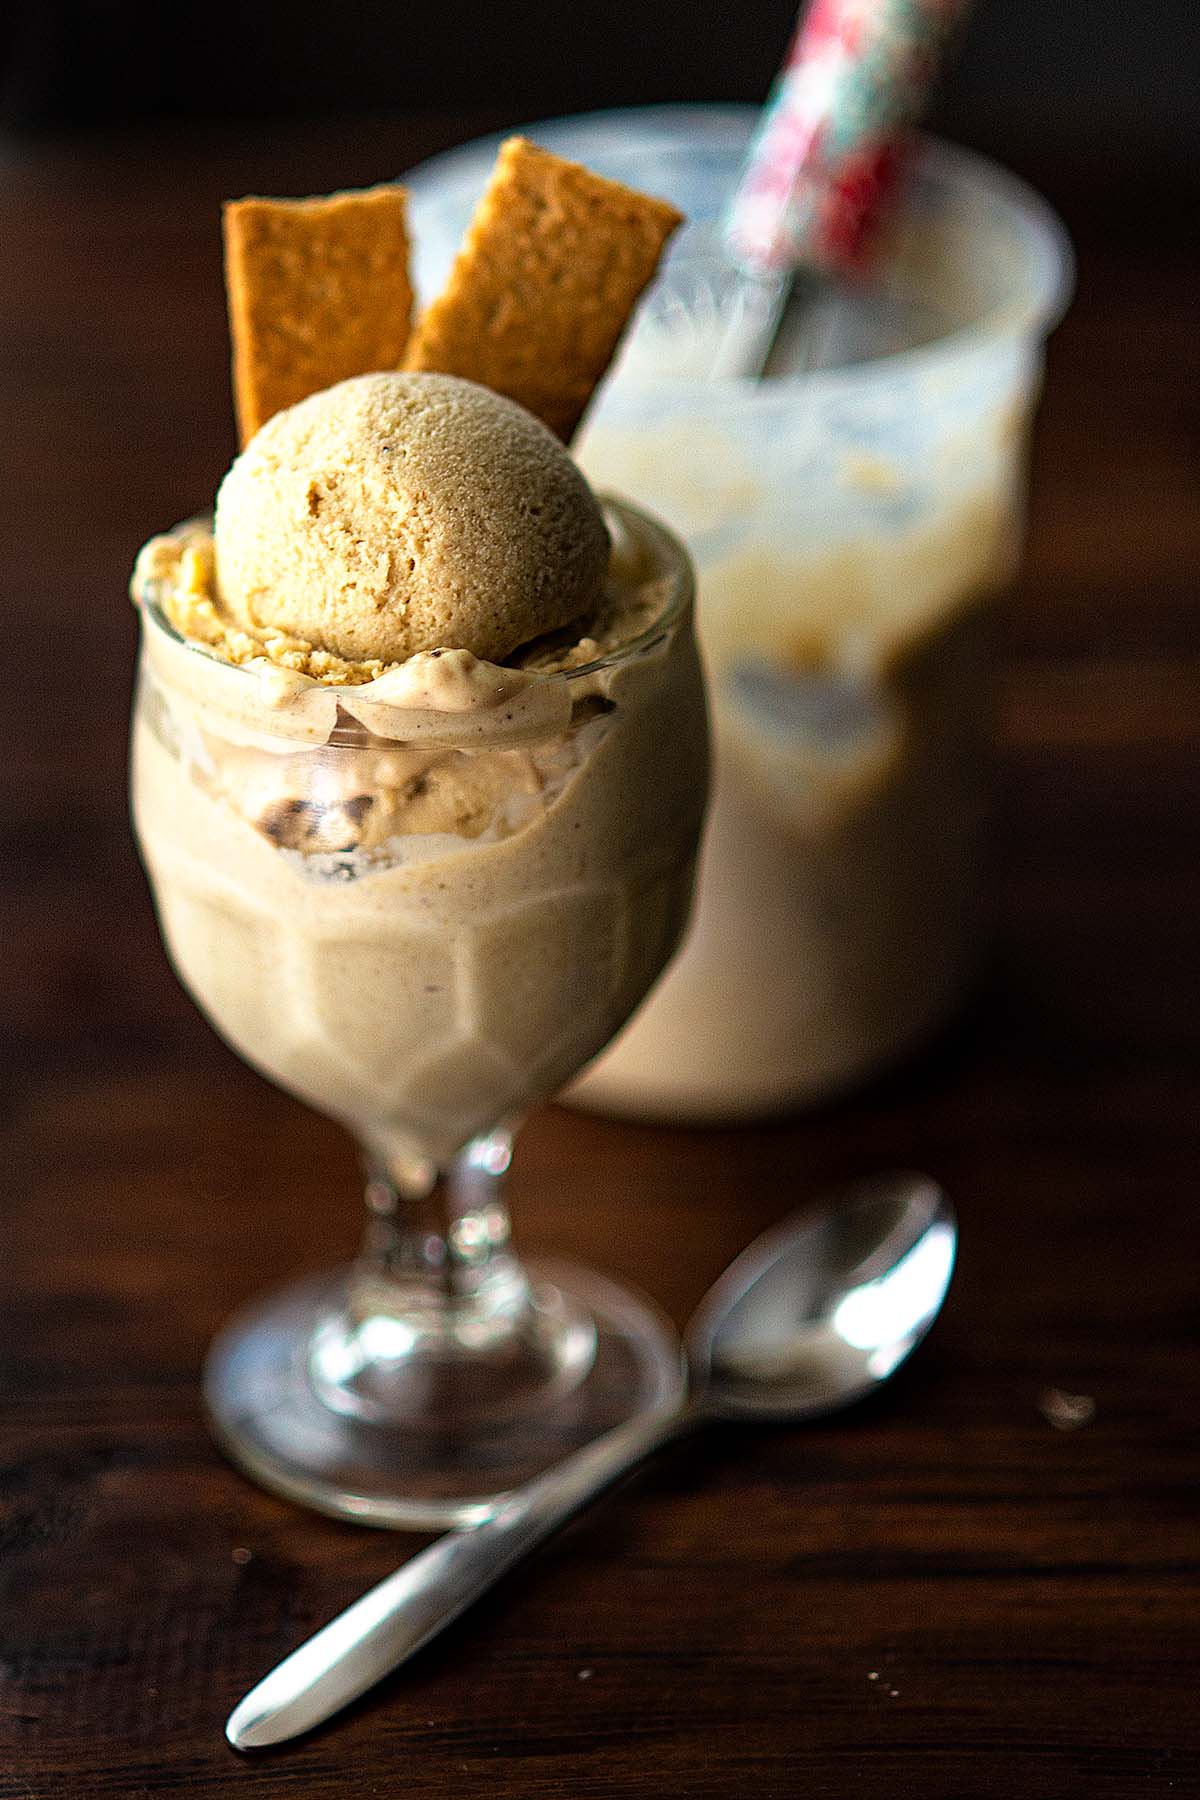 Homemade bananas foster ice cream served in glass serving dishes and garnished with graham crackers.